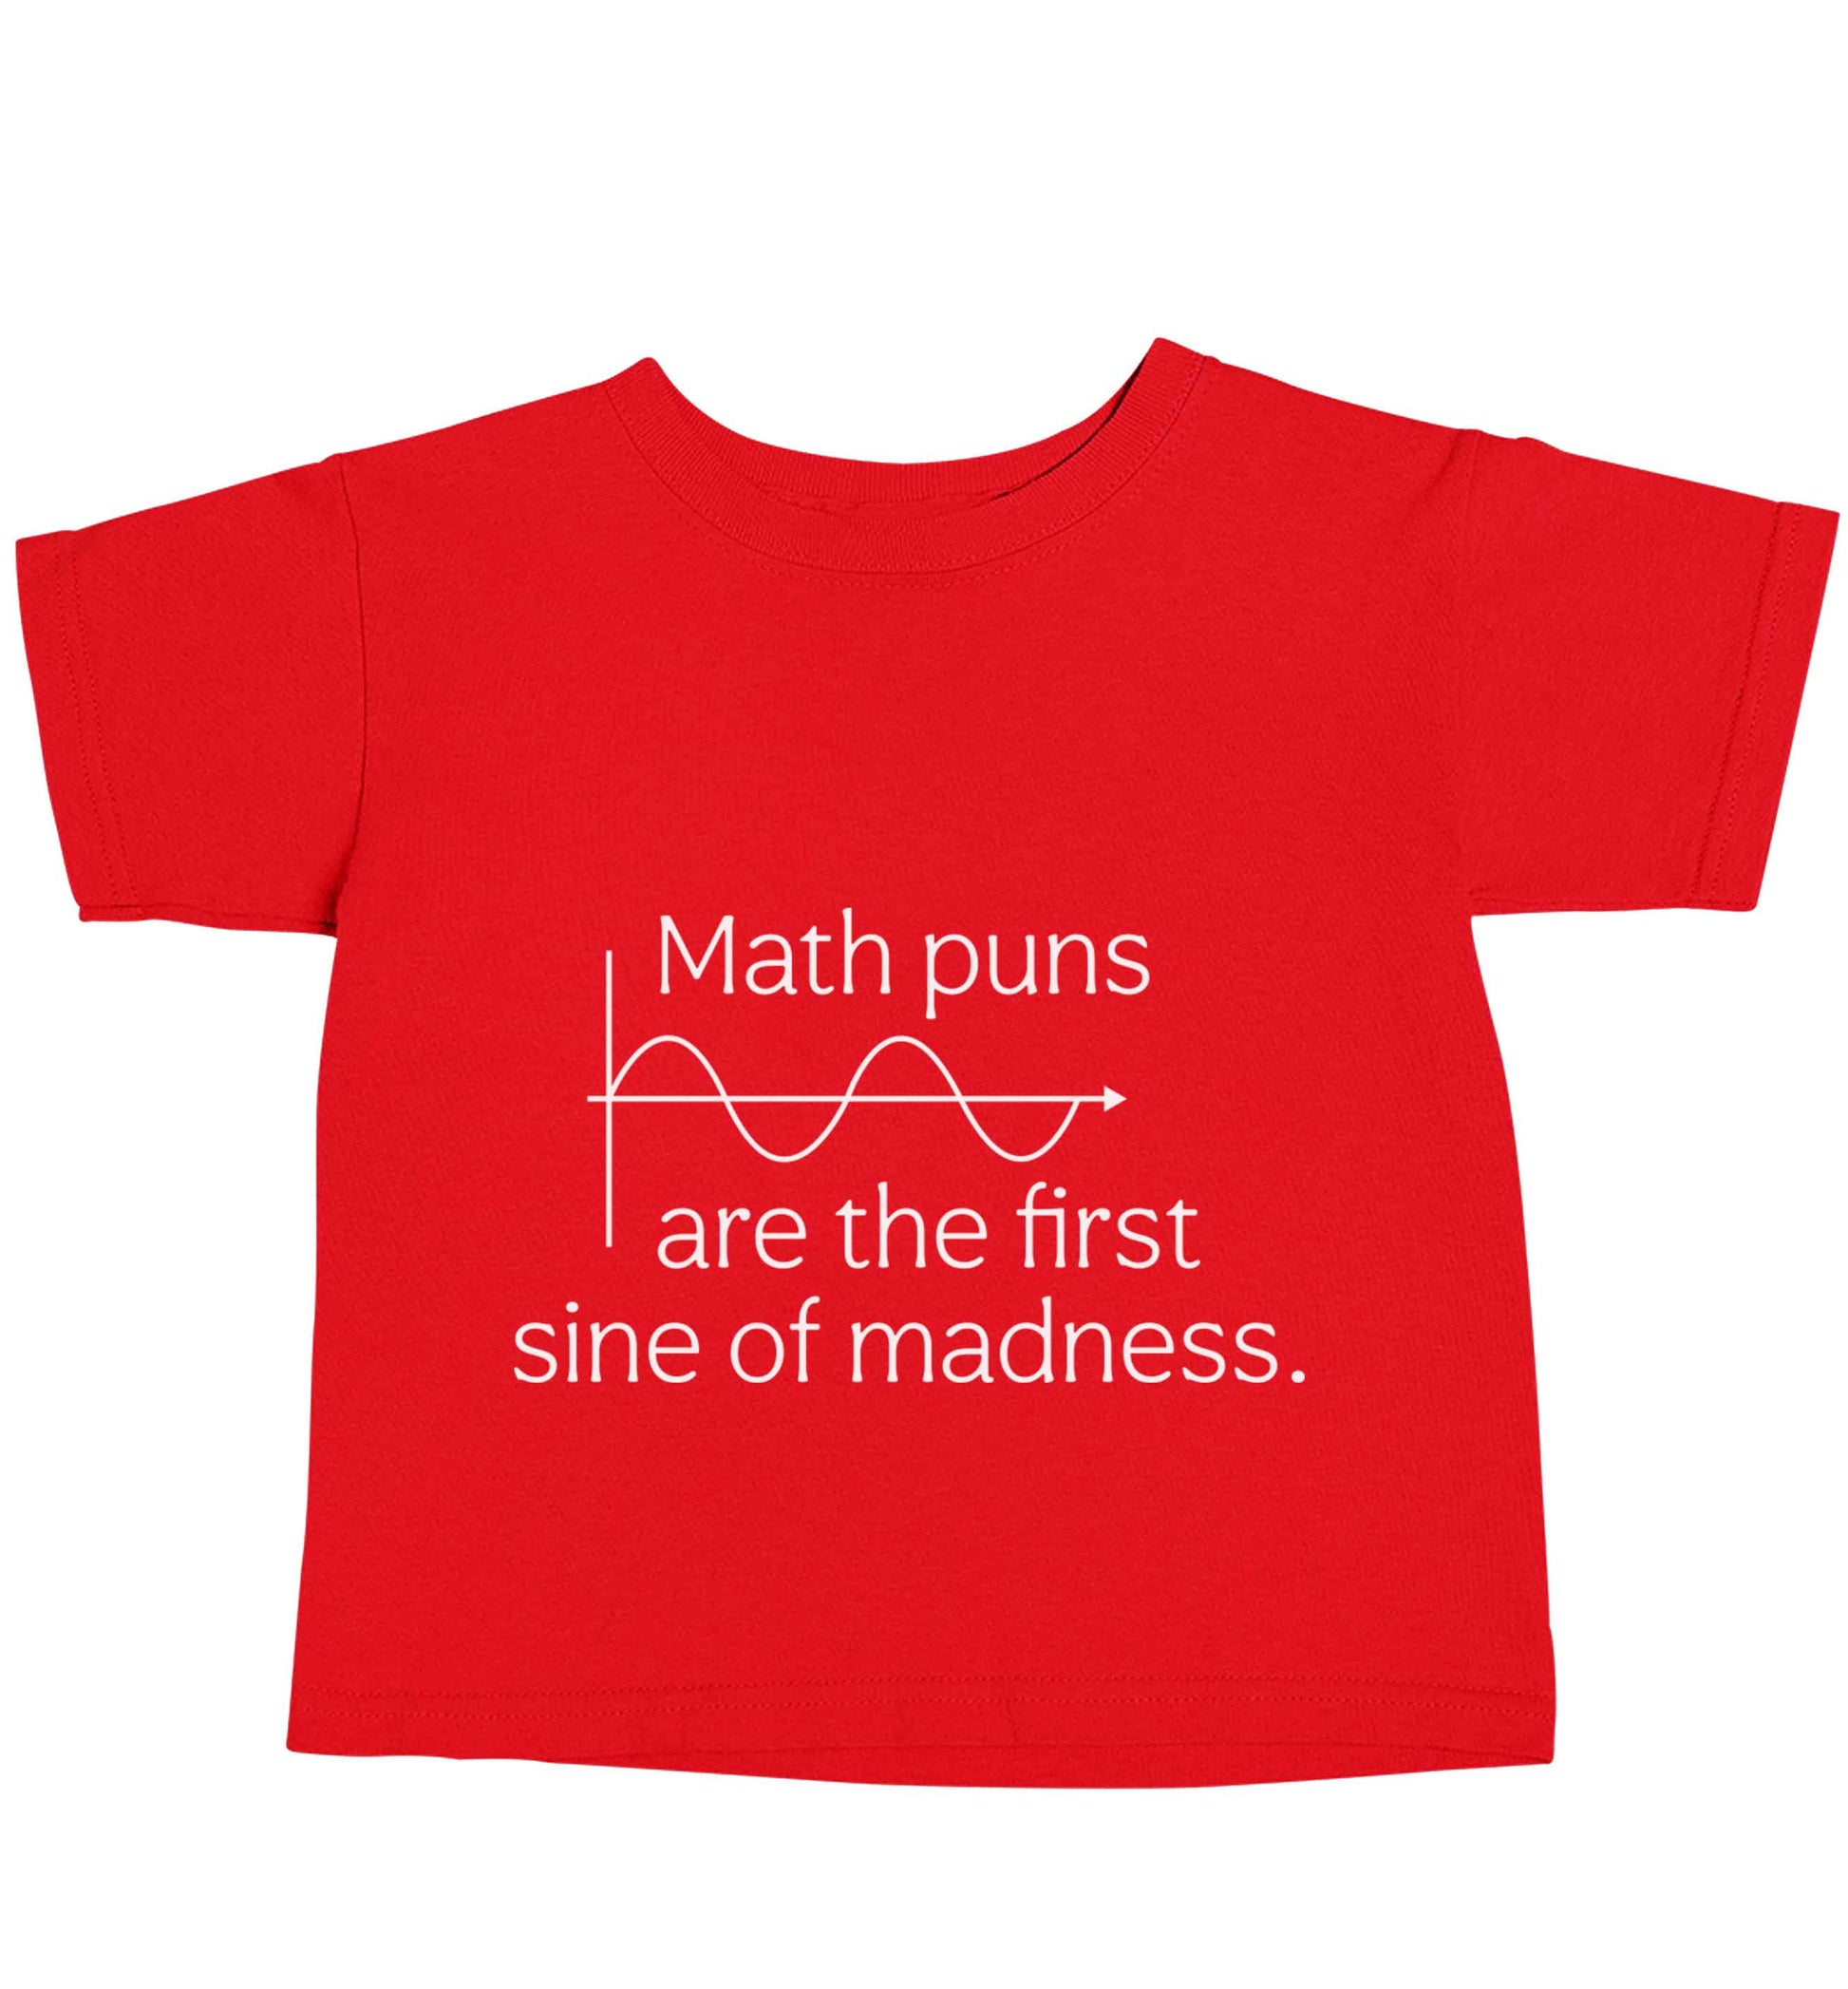 Math puns are the first sine of madness red baby toddler Tshirt 2 Years